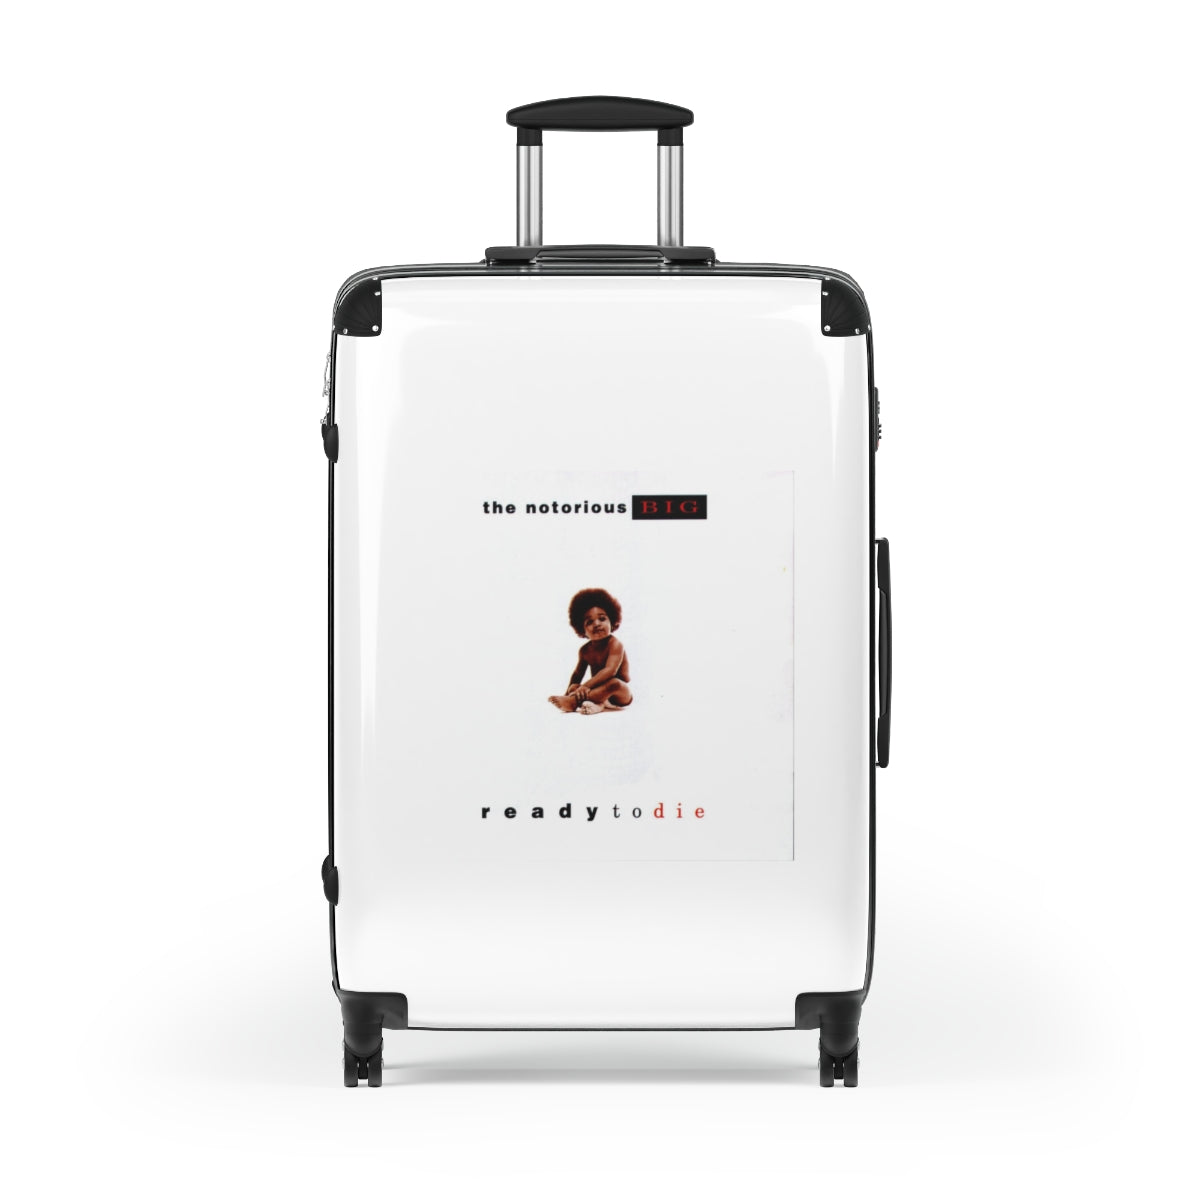 Getrott The Notorious BIG Ready To Die White Cabin Suitcase Inner Pockets Extended Storage Adjustable Telescopic Handle Inner Pockets Double wheeled Polycarbonate Hard-shell Built-in Lock